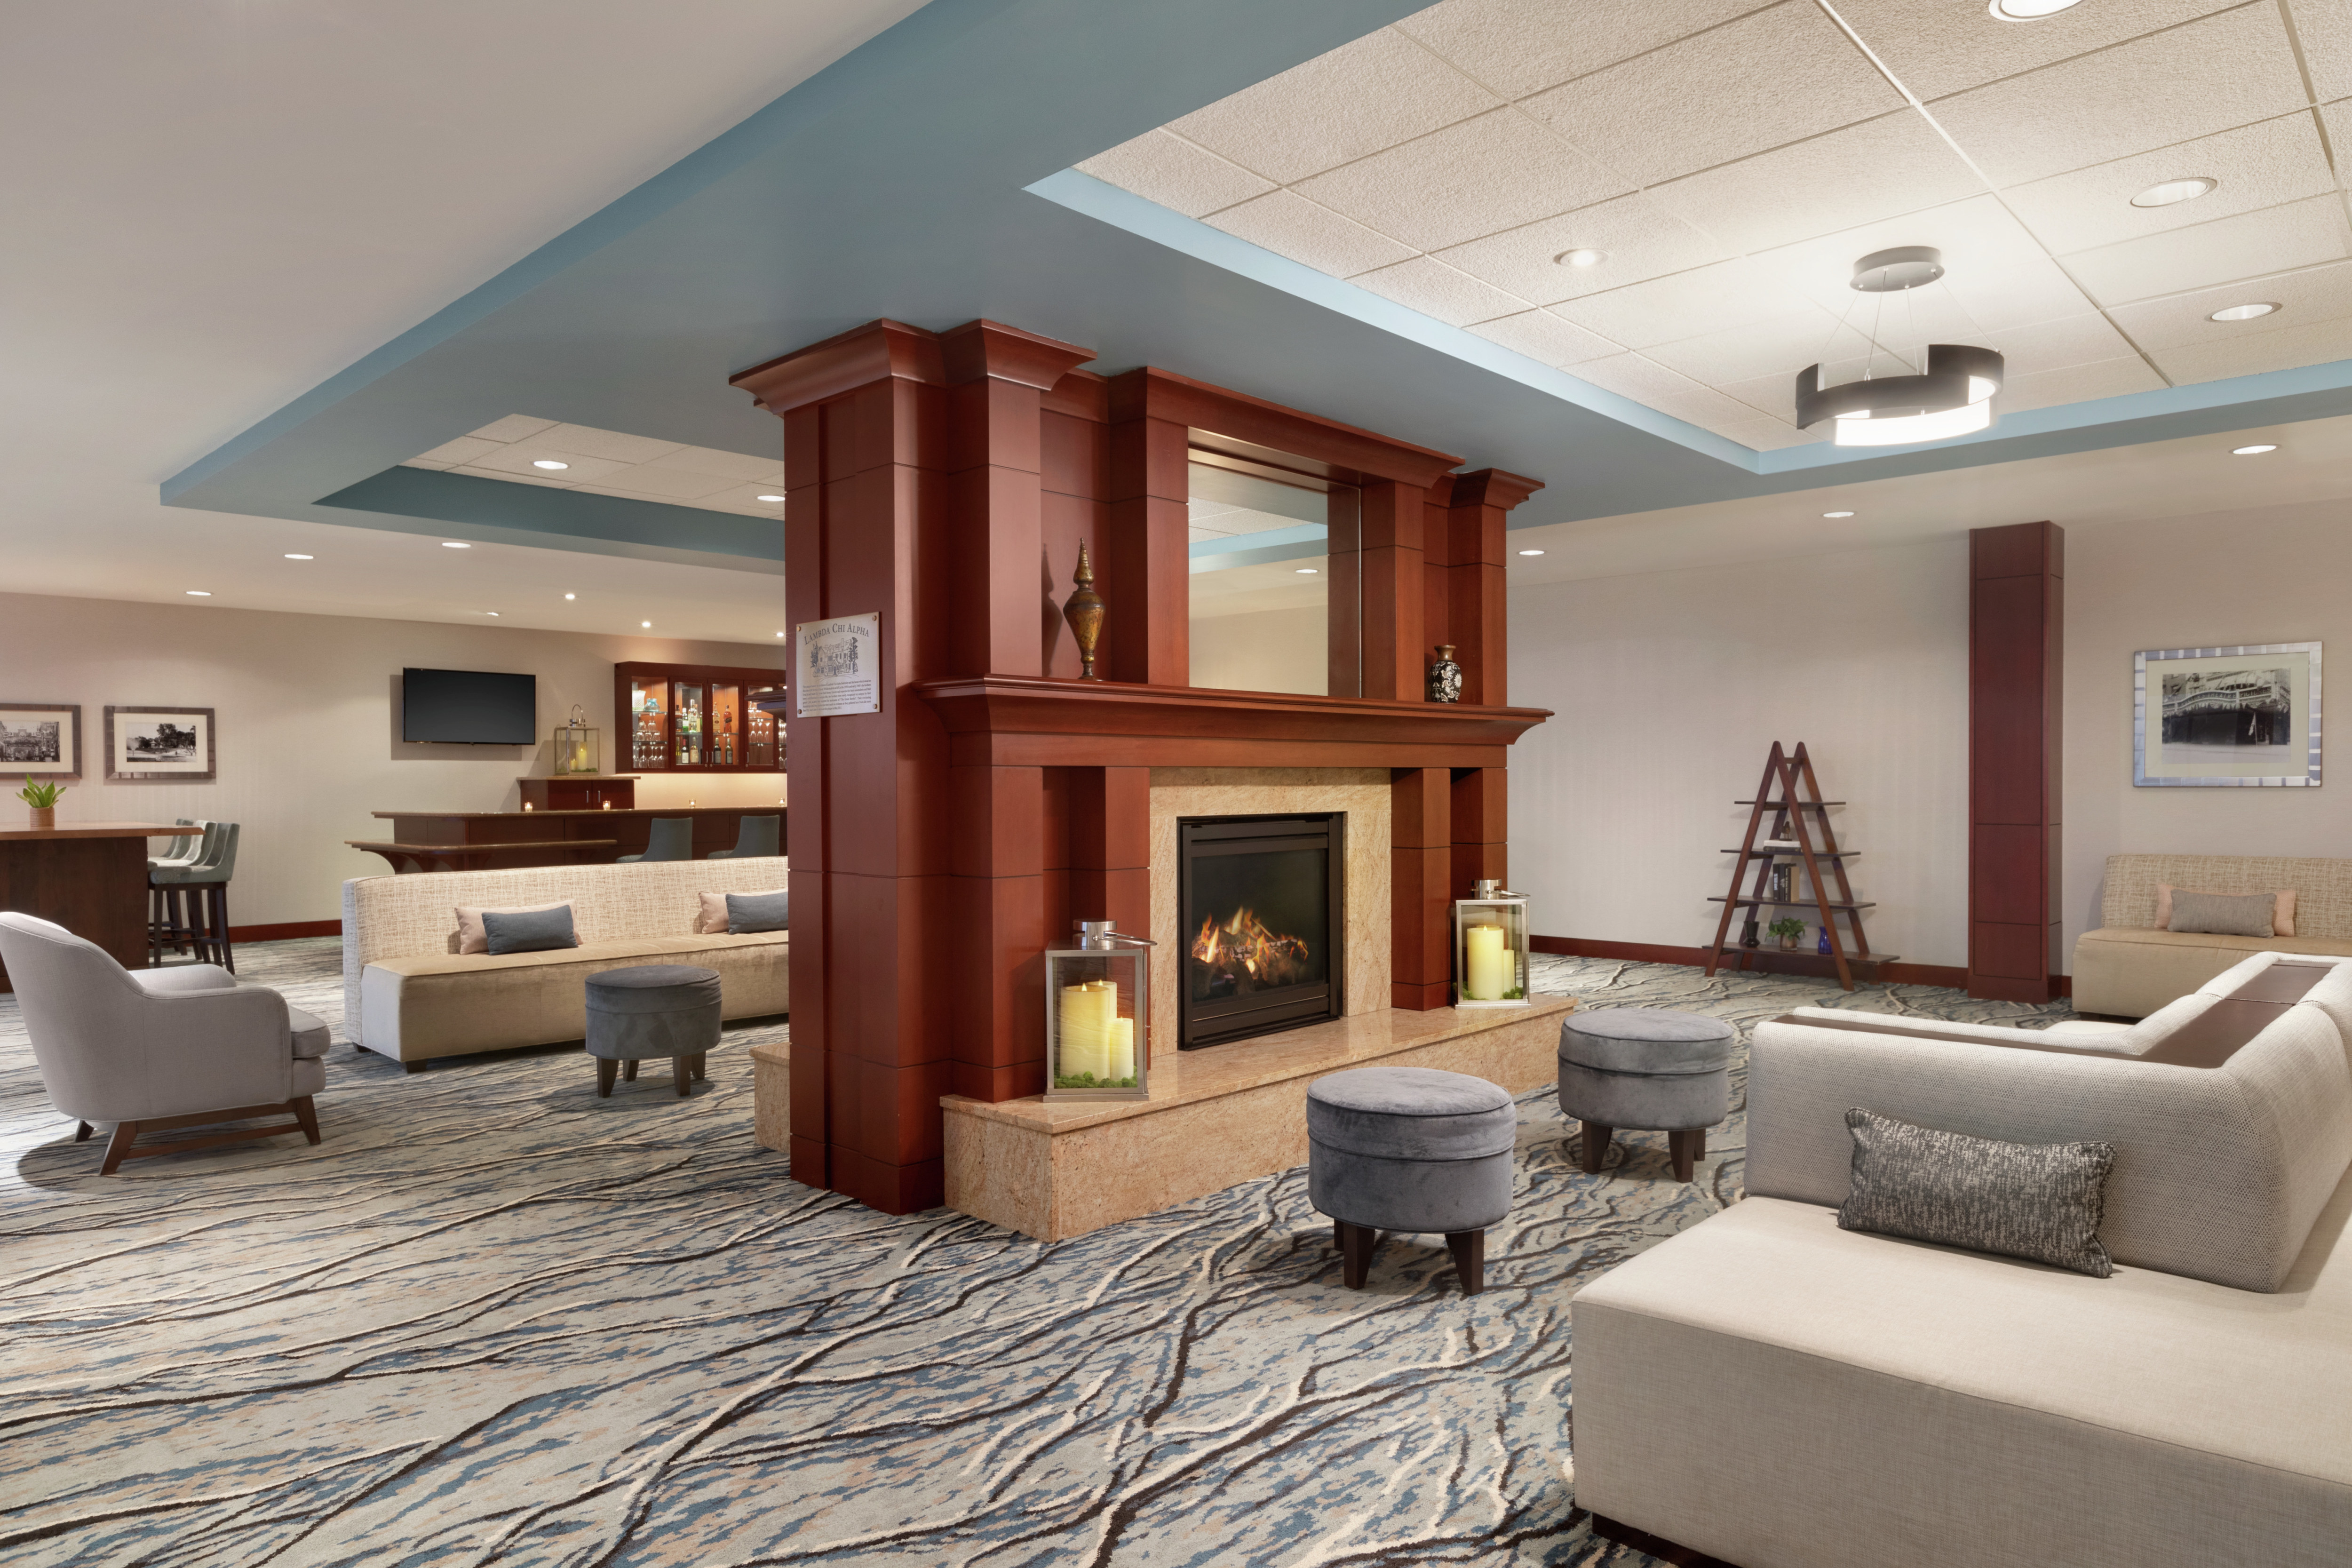 Stunning hotel atrium featuring comfortable seating, large fireplace, and bar.